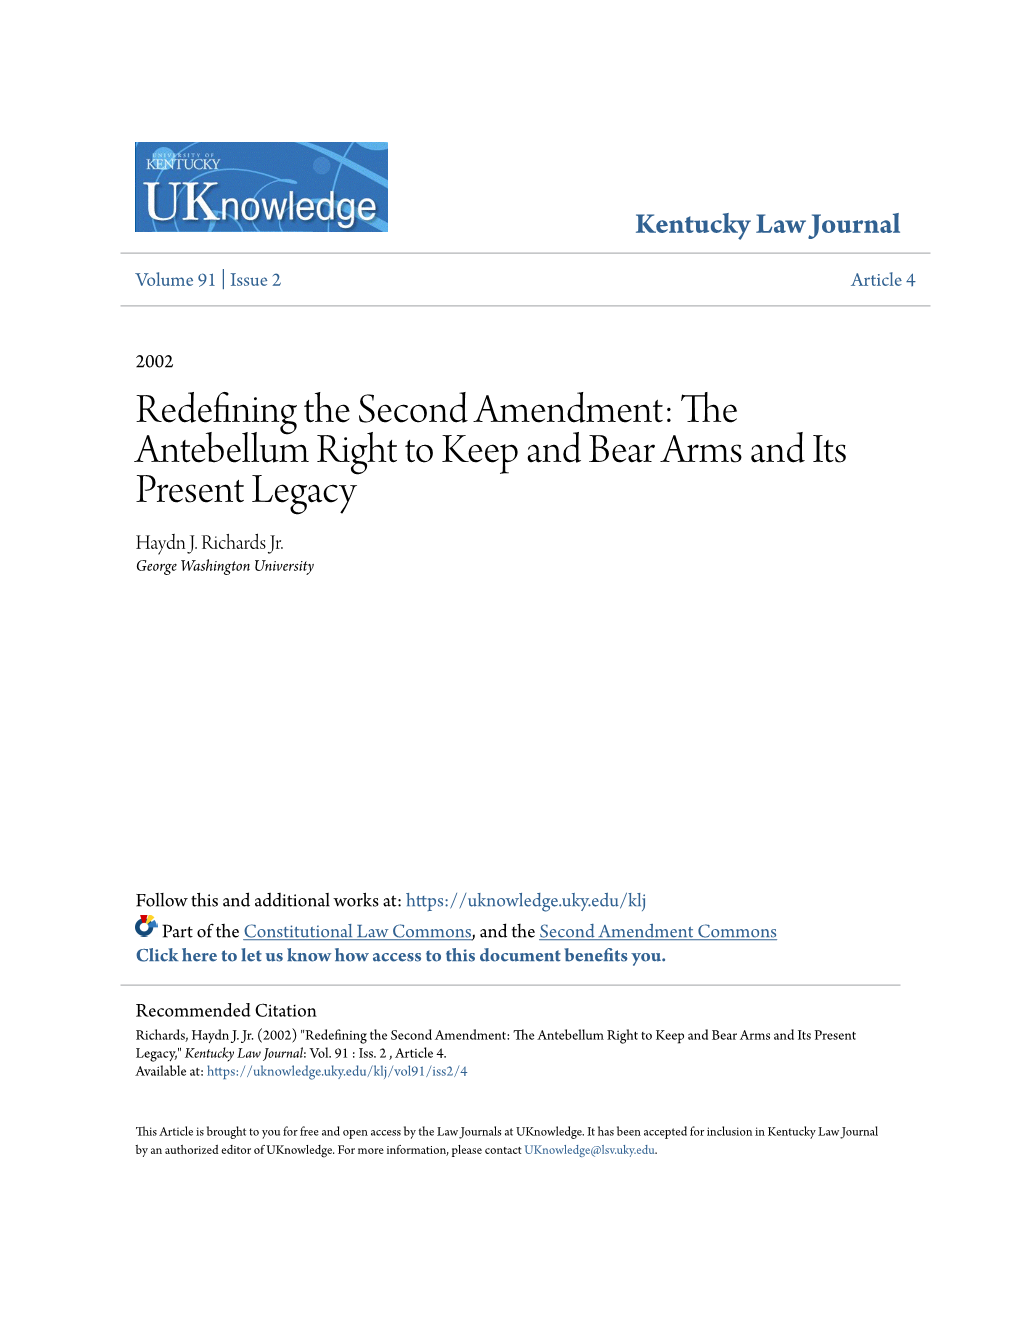 Redefining the Second Amendment: the Antebellum Right to Keep and Bear Arms and Its Present Legacy Haydn J